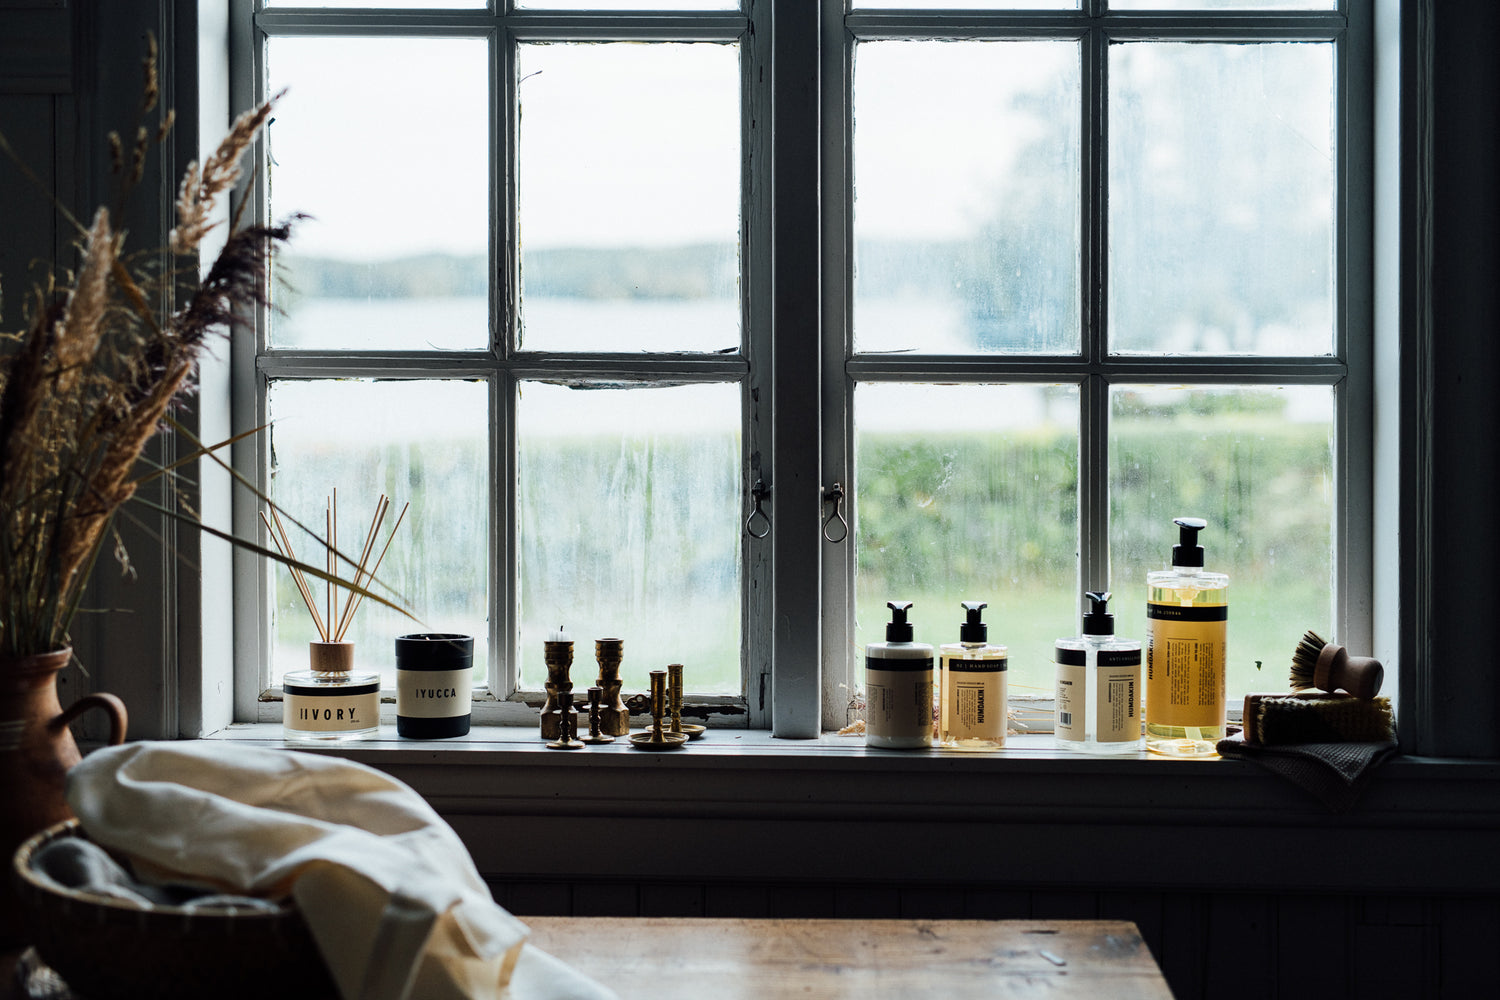 Humdakin's mission is to offer a wide range of household and cleaning products inspired by the Danish coasts and forests.